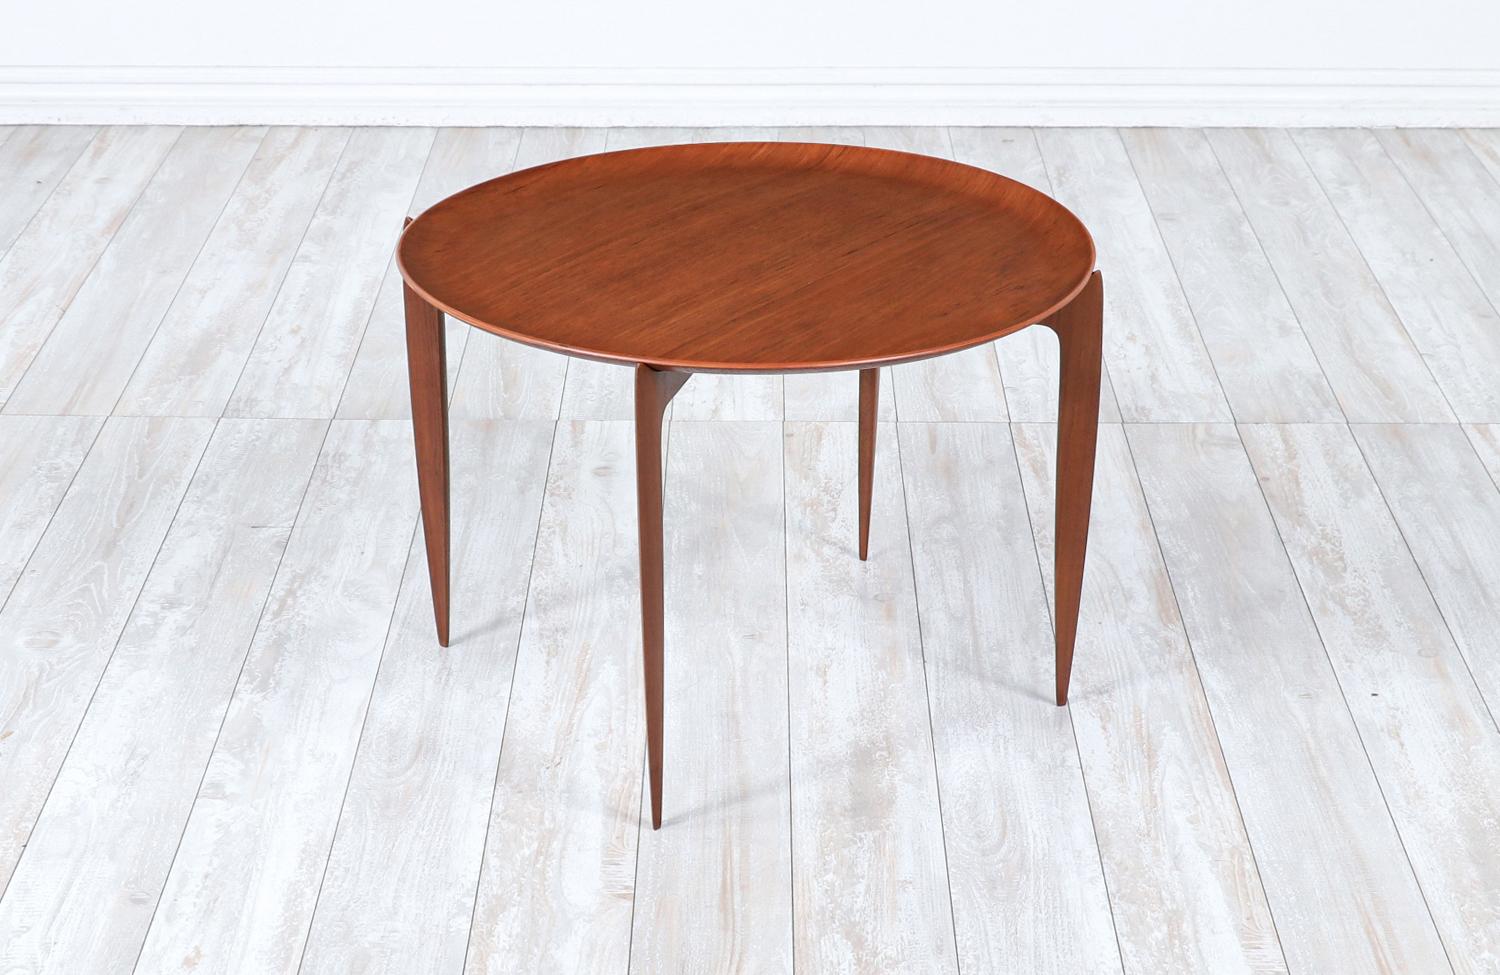 Versatile Danish Modern tray table designed by H. Engholm & Svend Åge Willumsen for Fritz Hansen in Denmark circa 1950s. This extraordinary and practical table design features a sculpted teak wood base with a spider leg base and a rounded teak tray